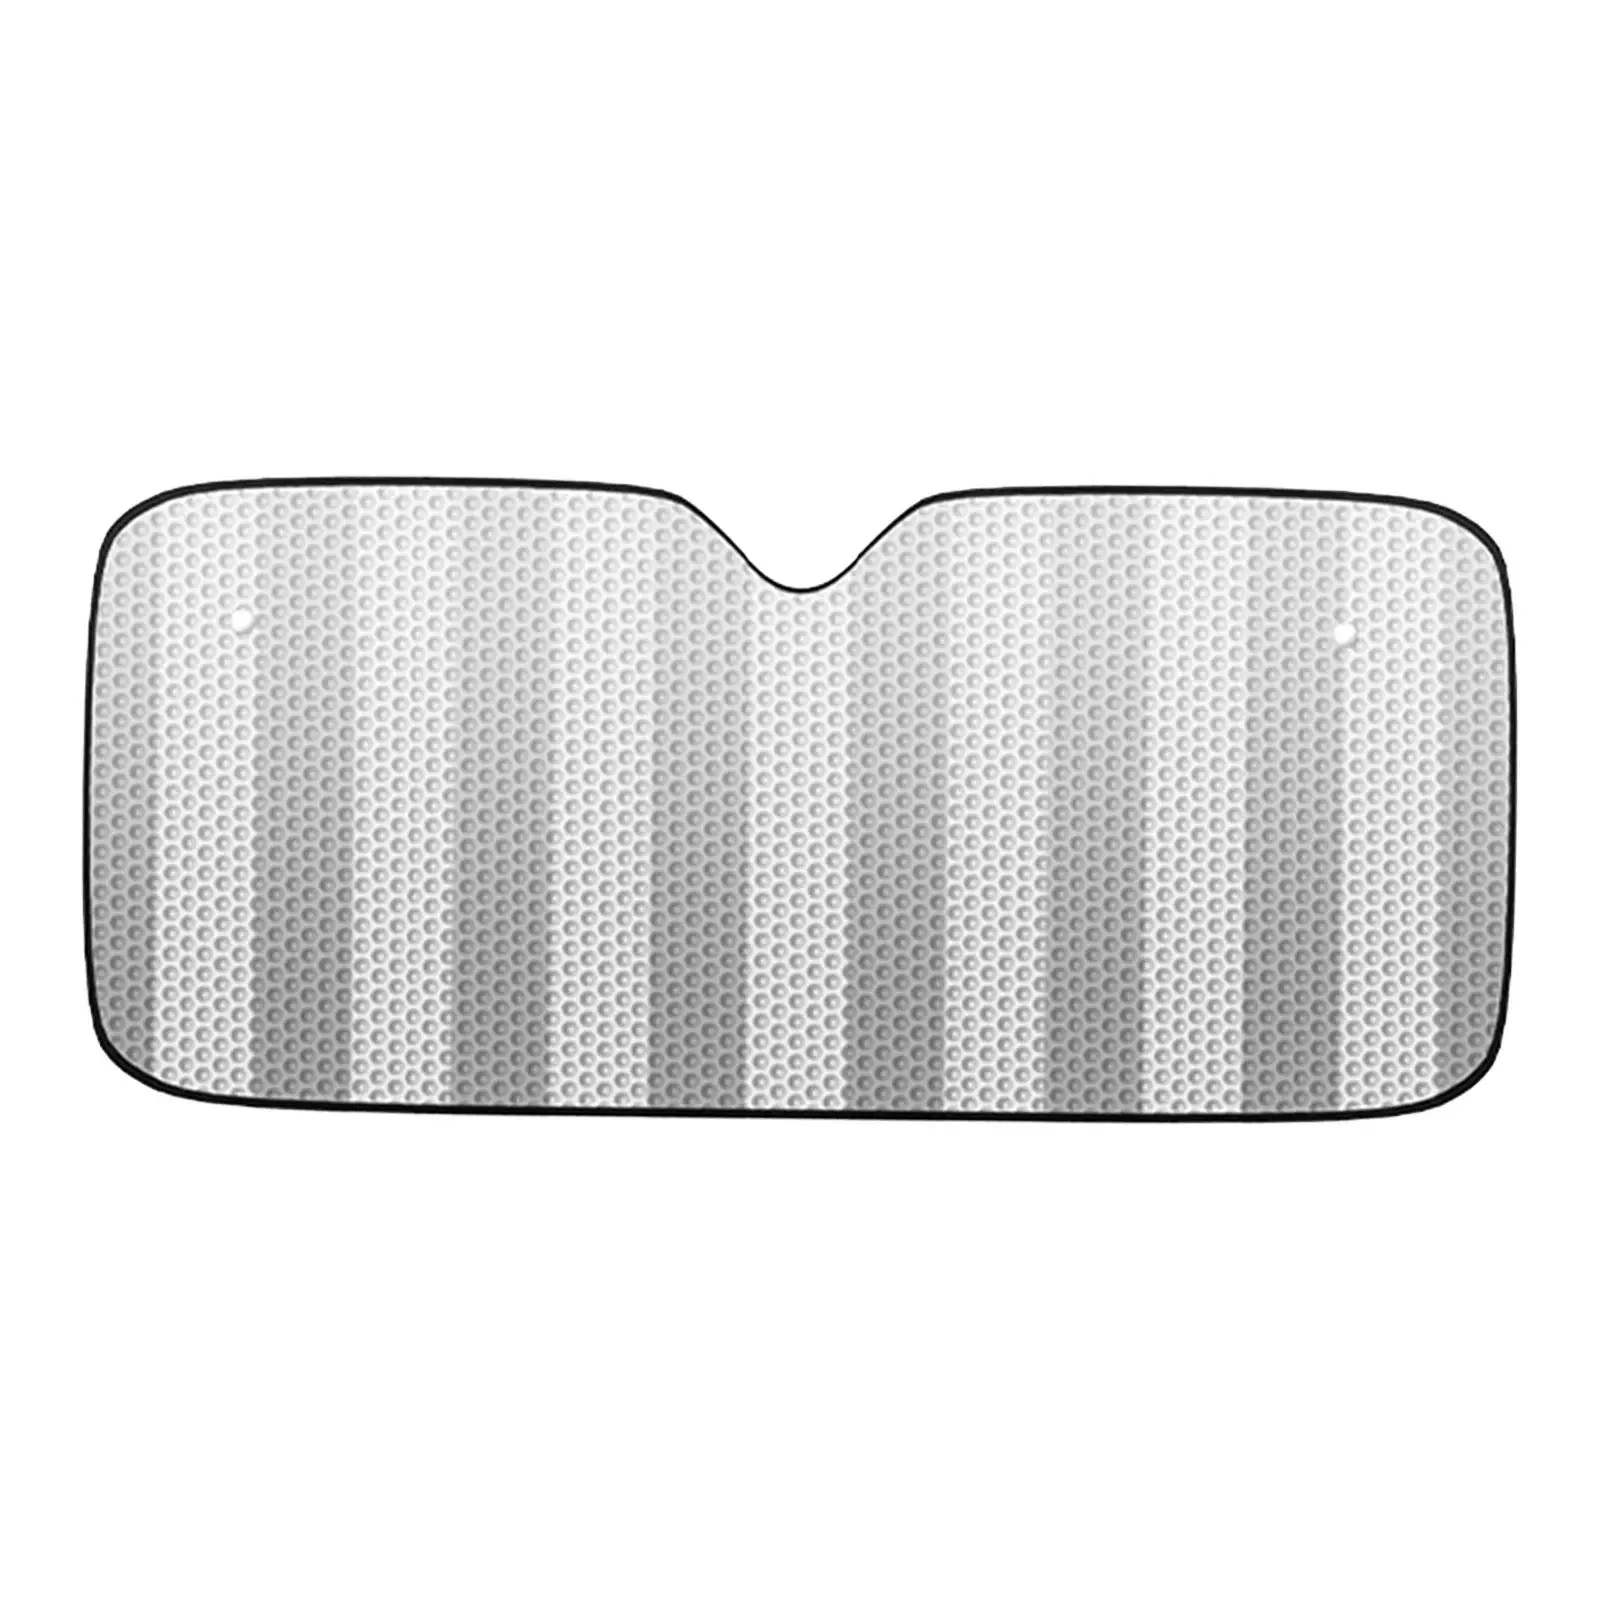 Car Window Shade Durable Visor for Most Vehicles SUV Compact Car